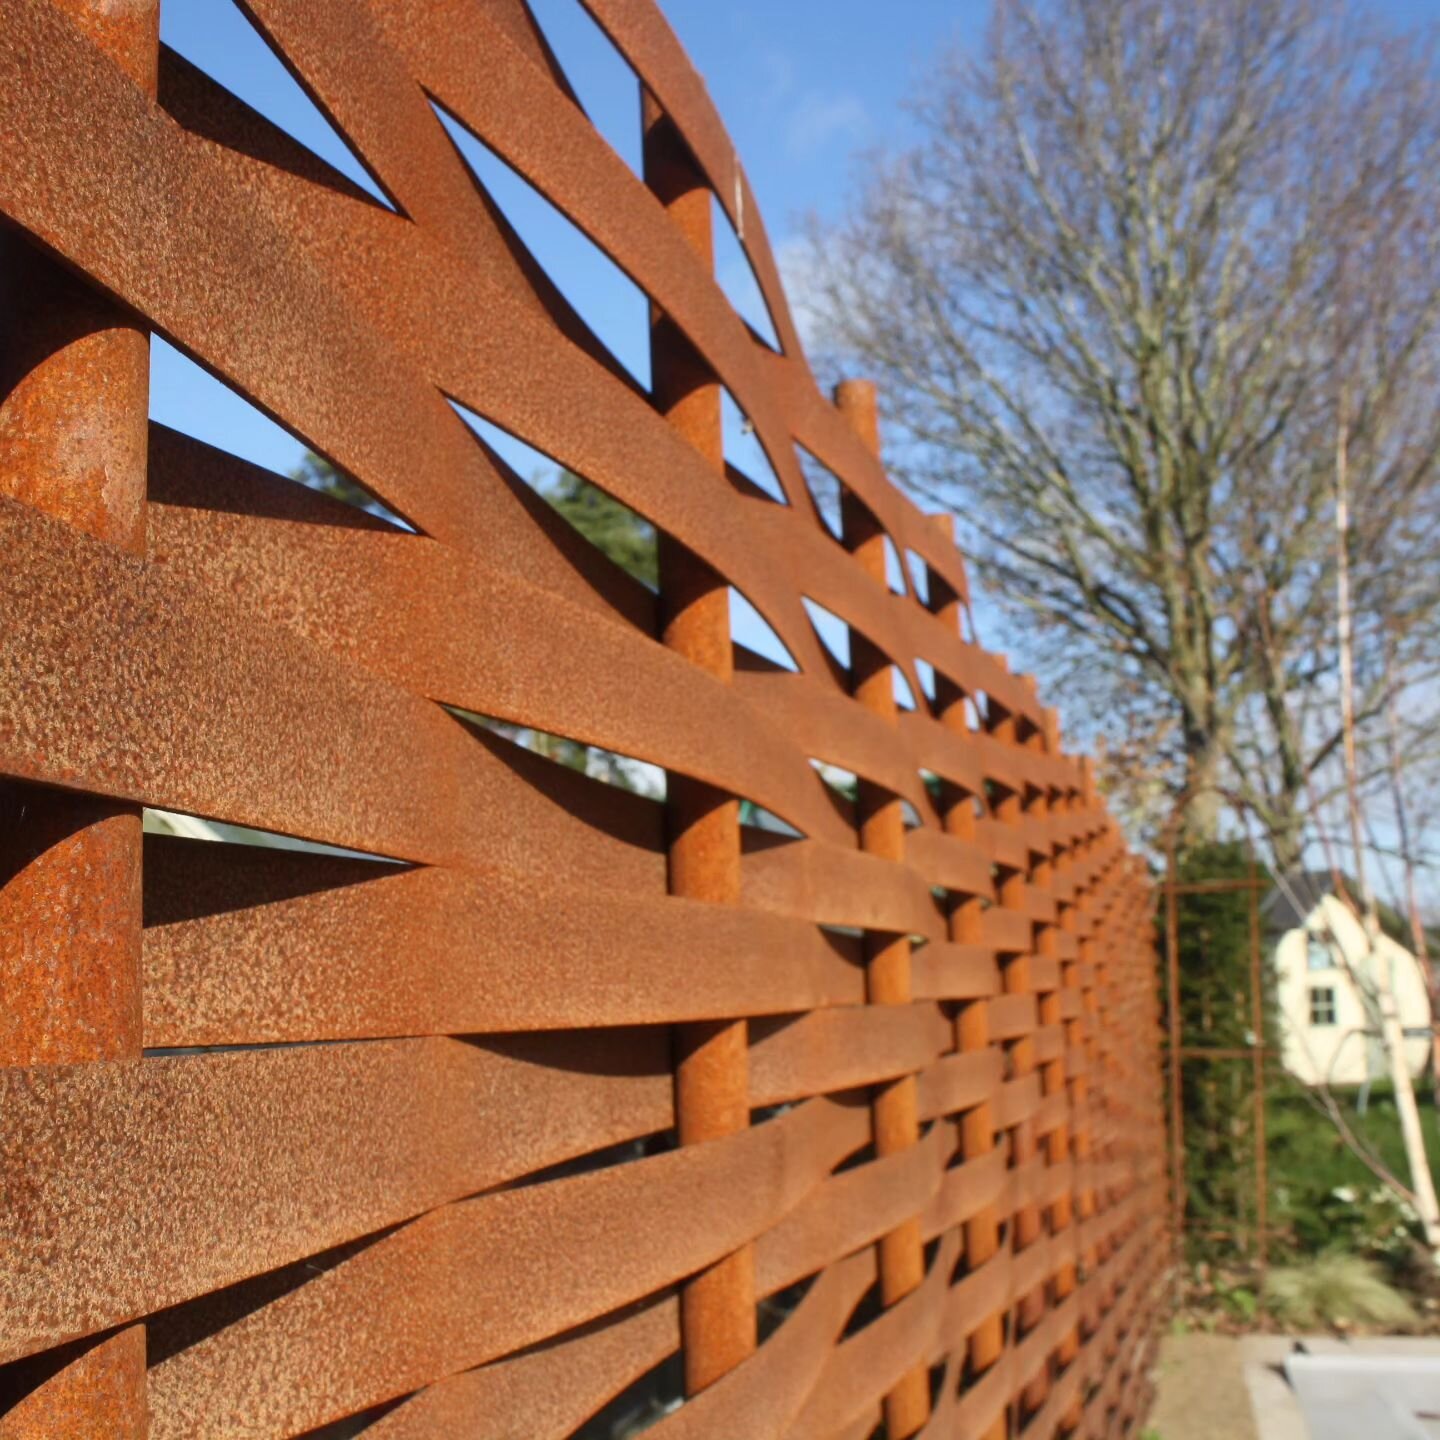 Fencing with a wow factor...

#wovenfencing #wovenfence #wovensteel #steelfencing #gardenfencing